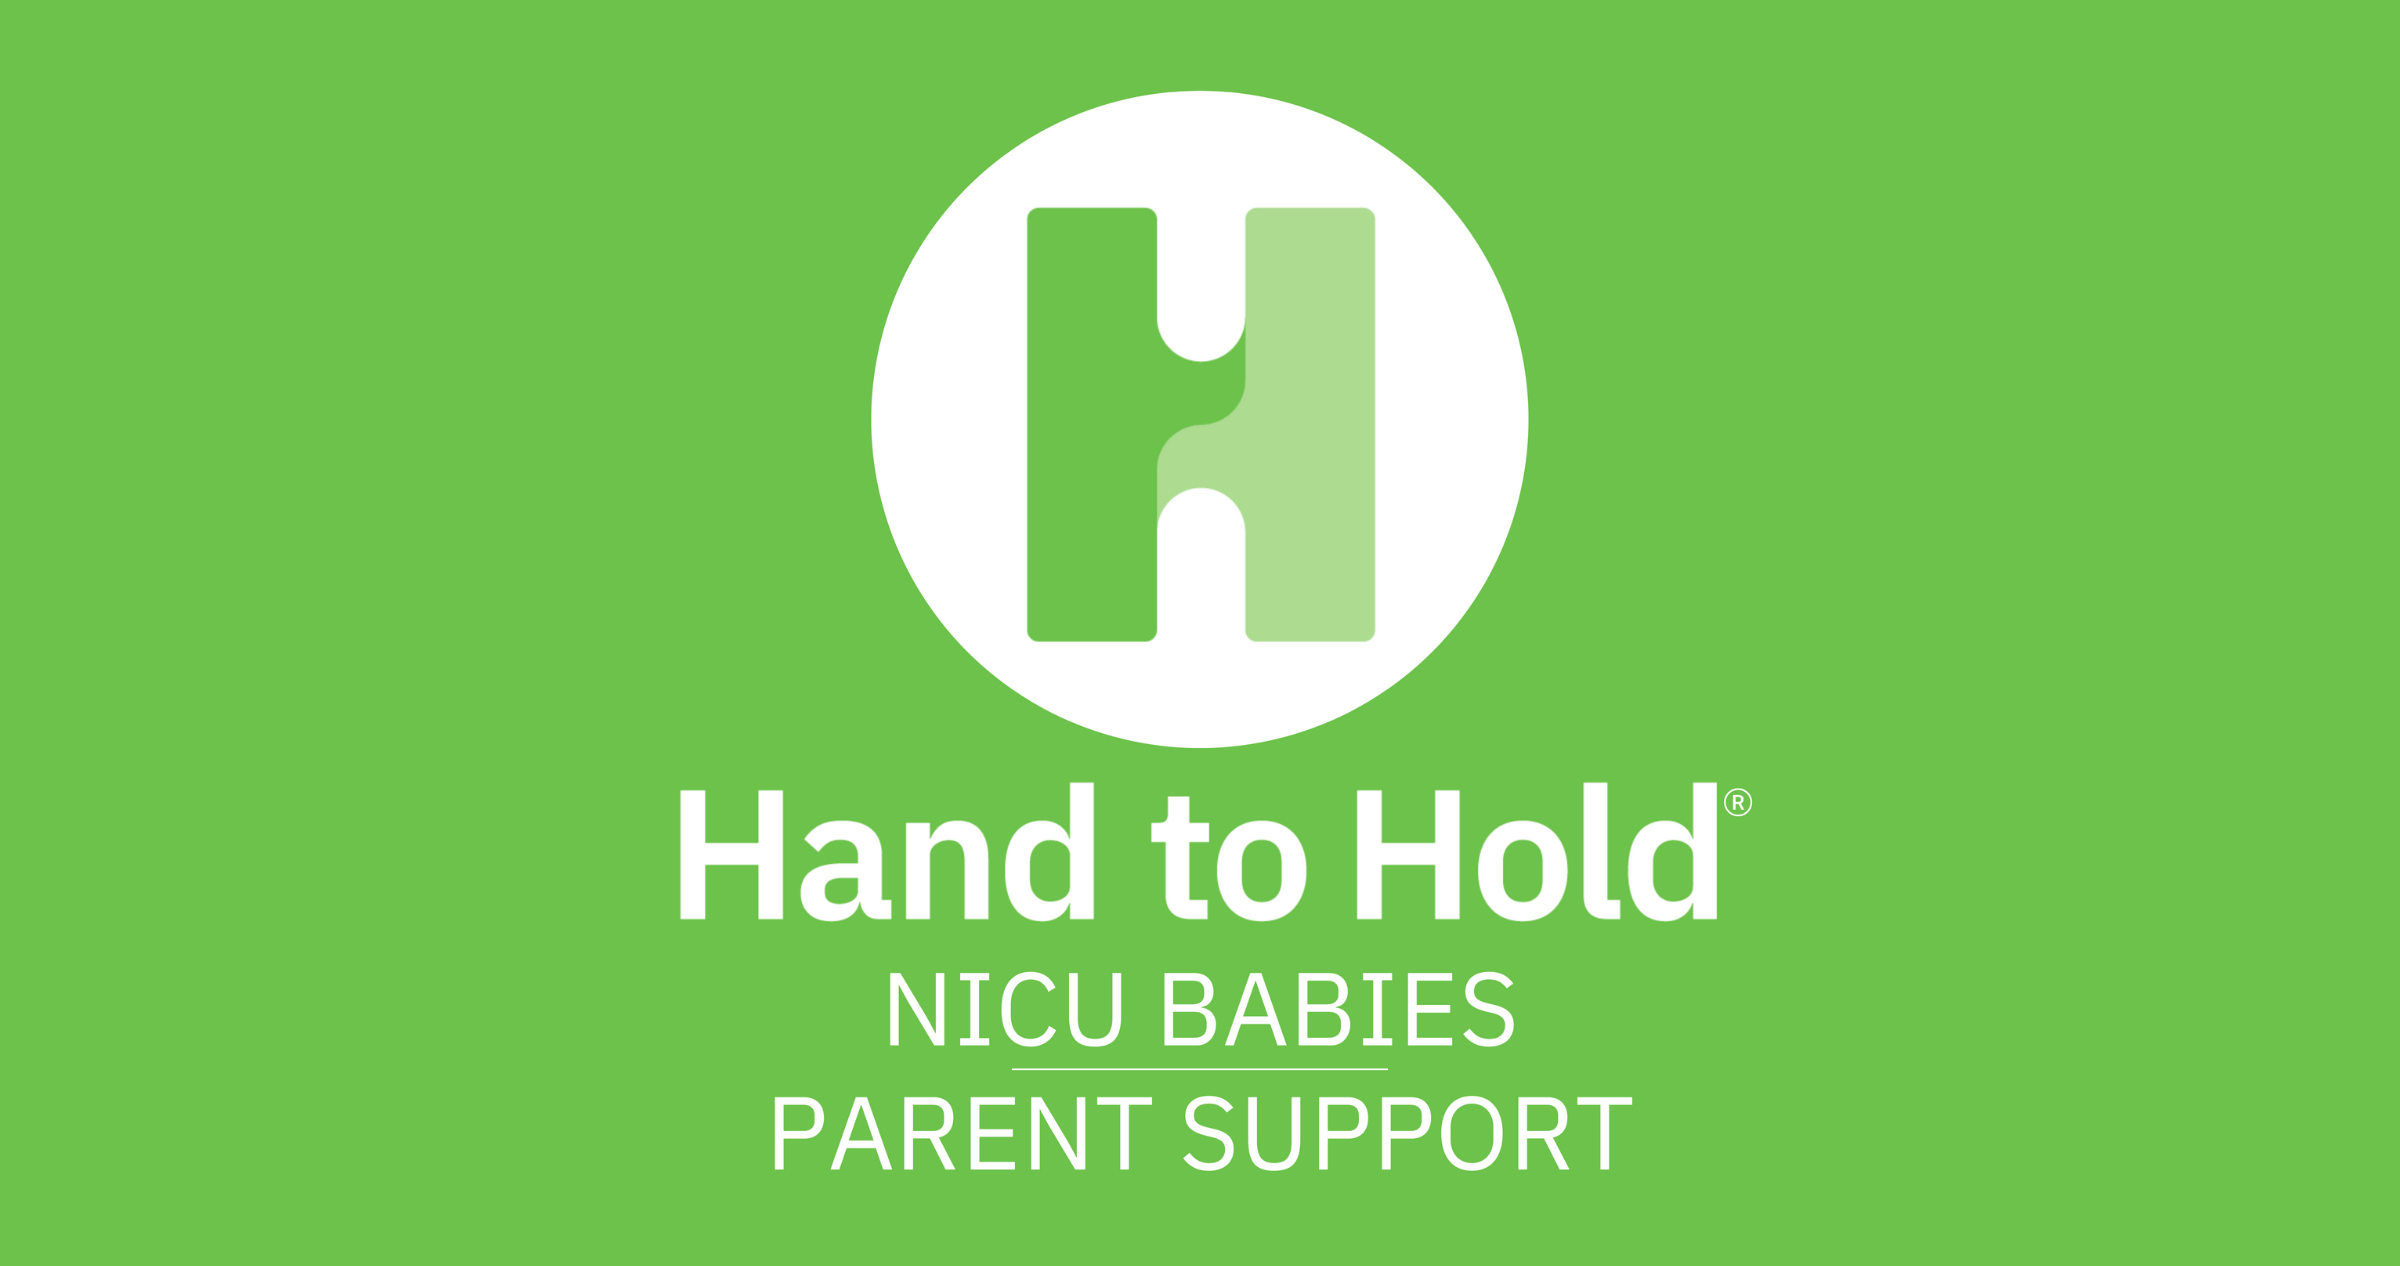 NICU Babies parent support podcast hand to hold